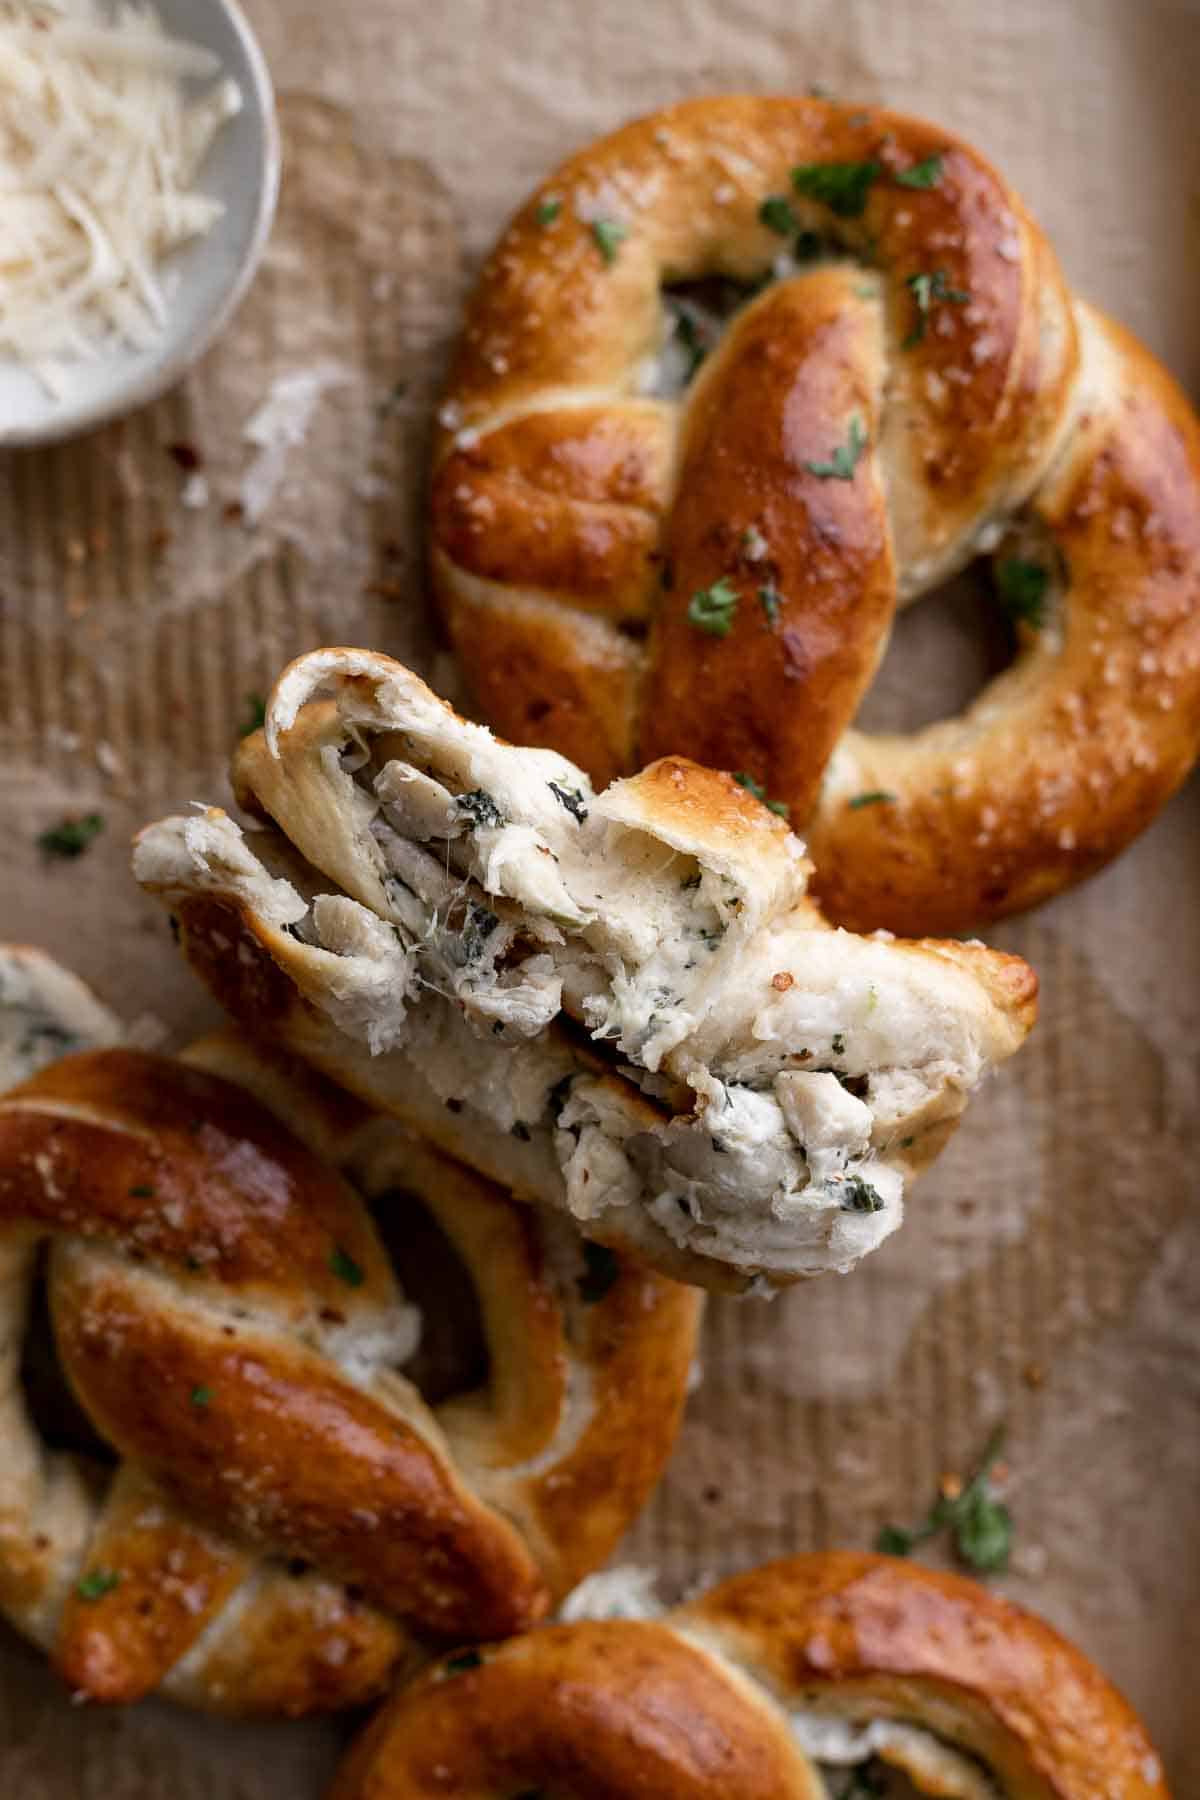 a pretzel ripped in half to show they are stuffed with spinach artichoke filling.